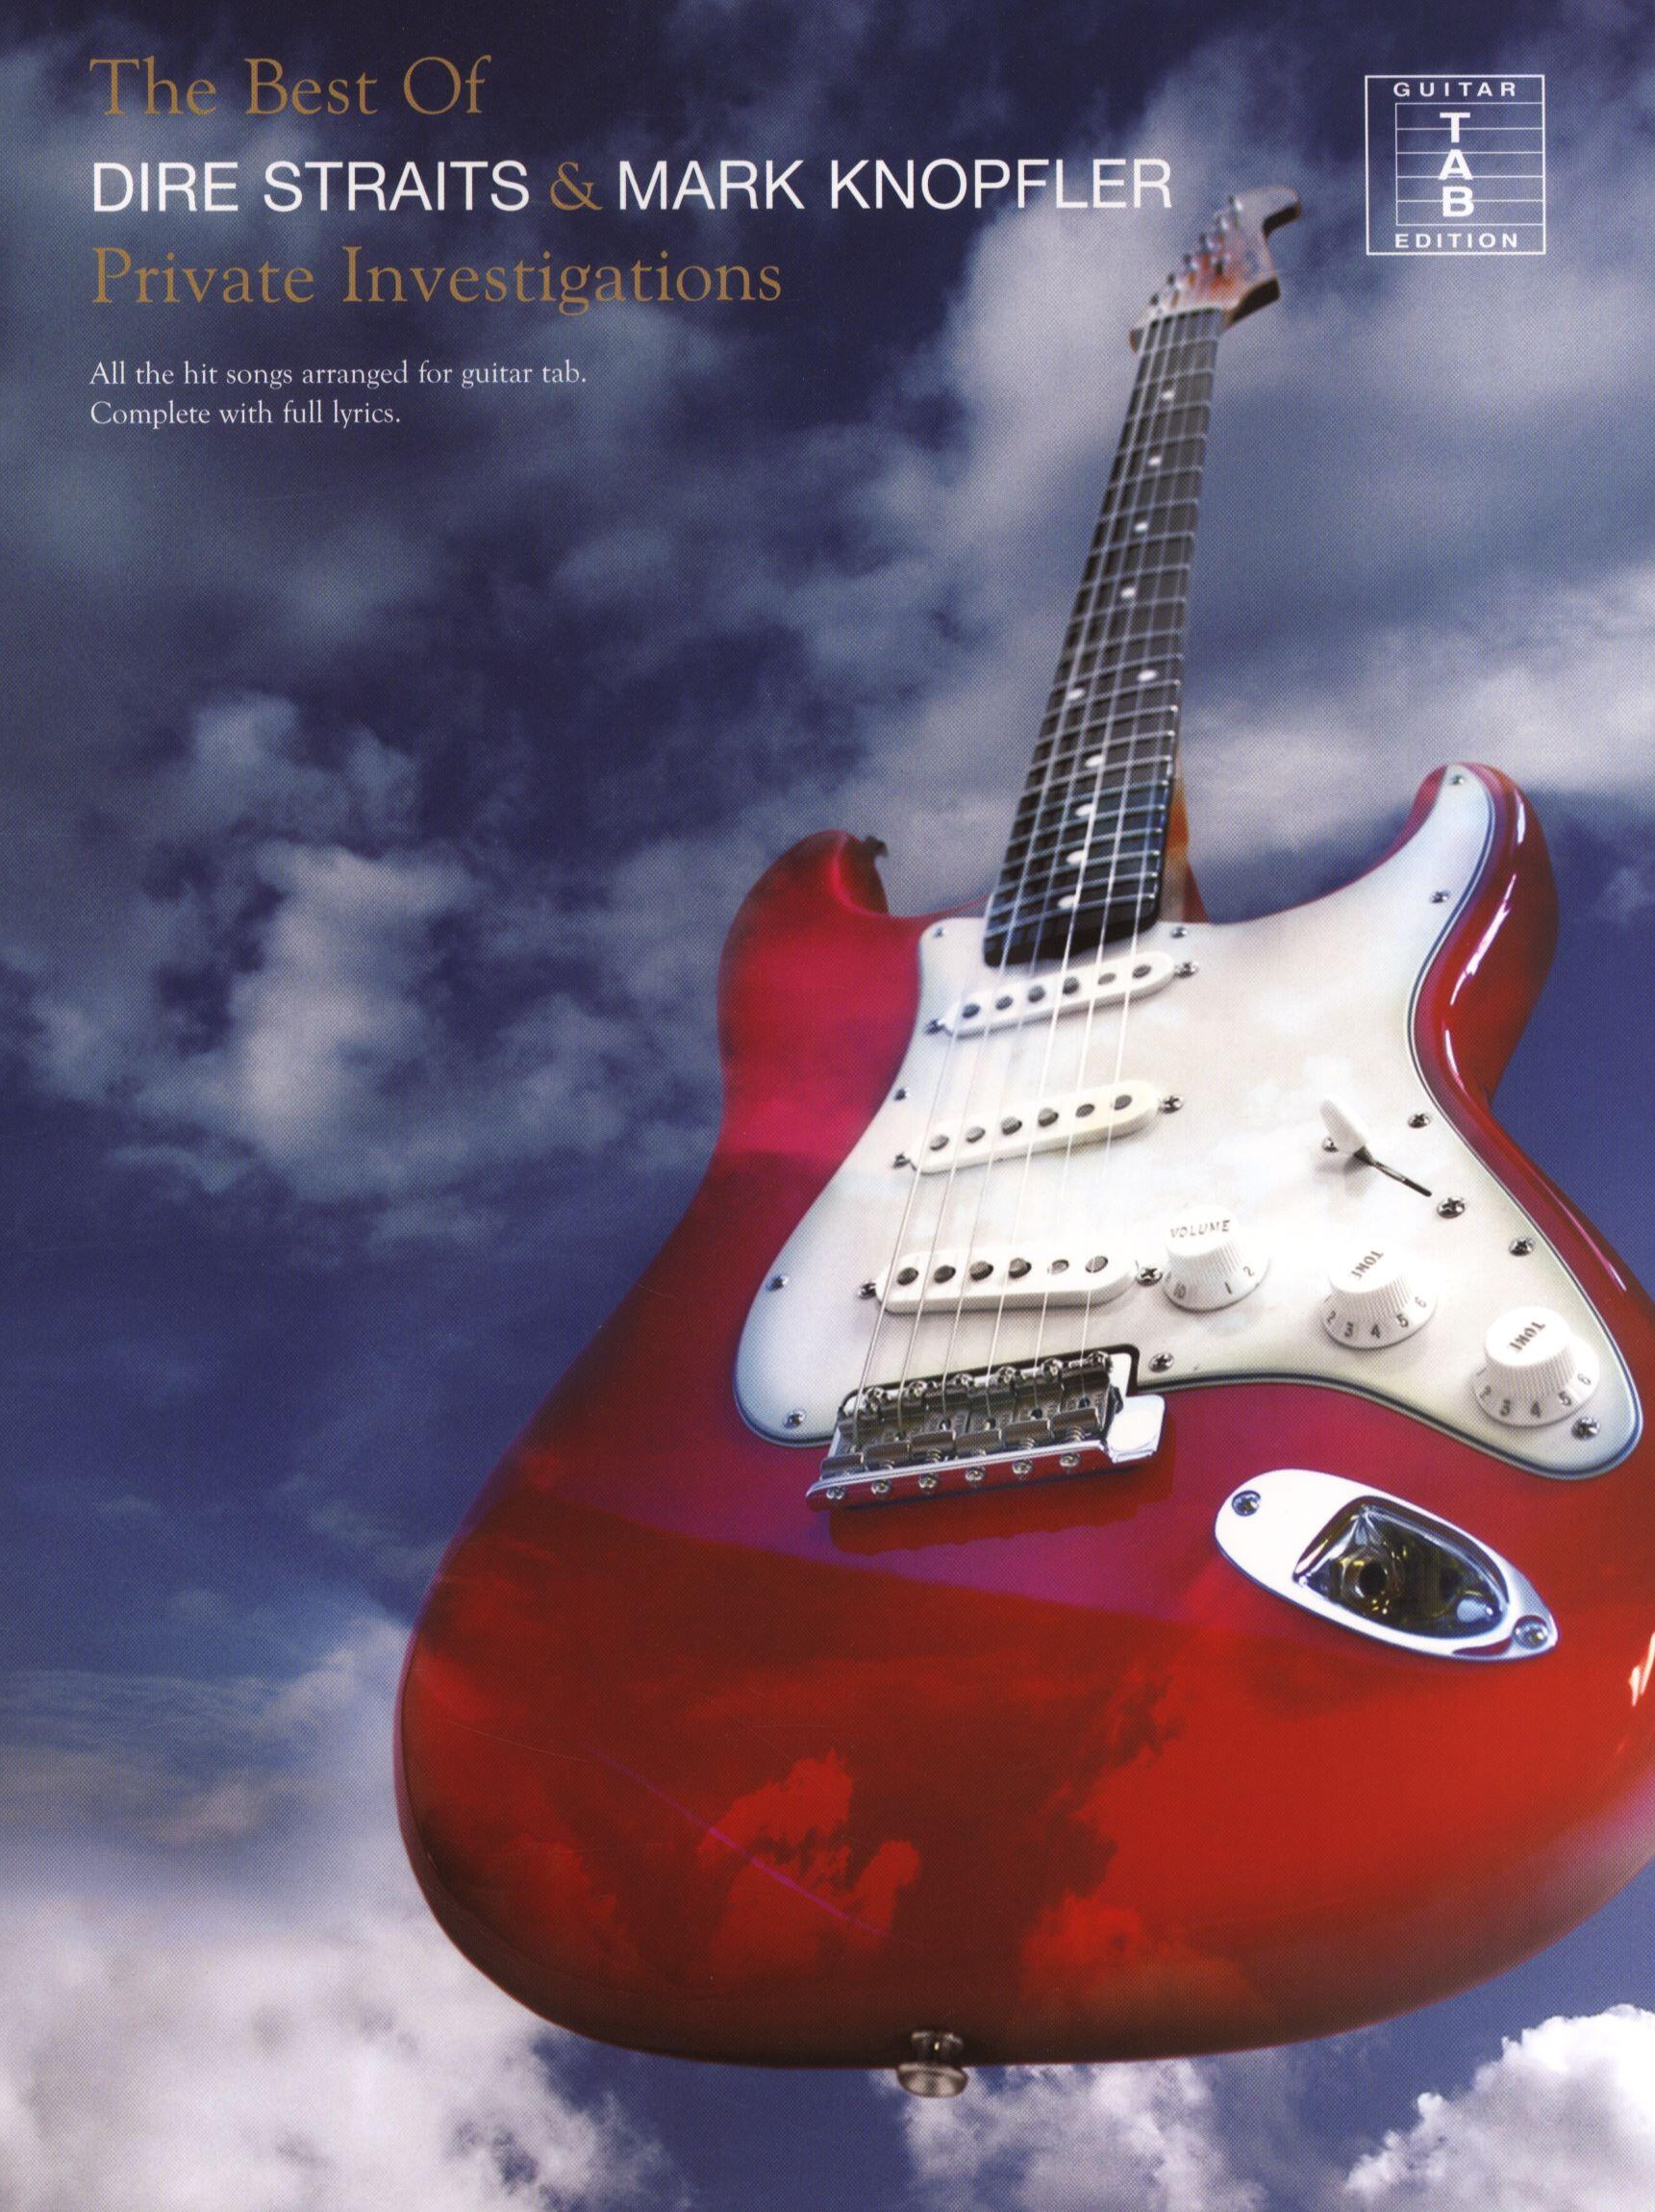 The Best Of Dire Straits And Mark Knopfler The Best of... All the Best Songs arranged for guitar tab. Complete with full lyrics. : photo 1